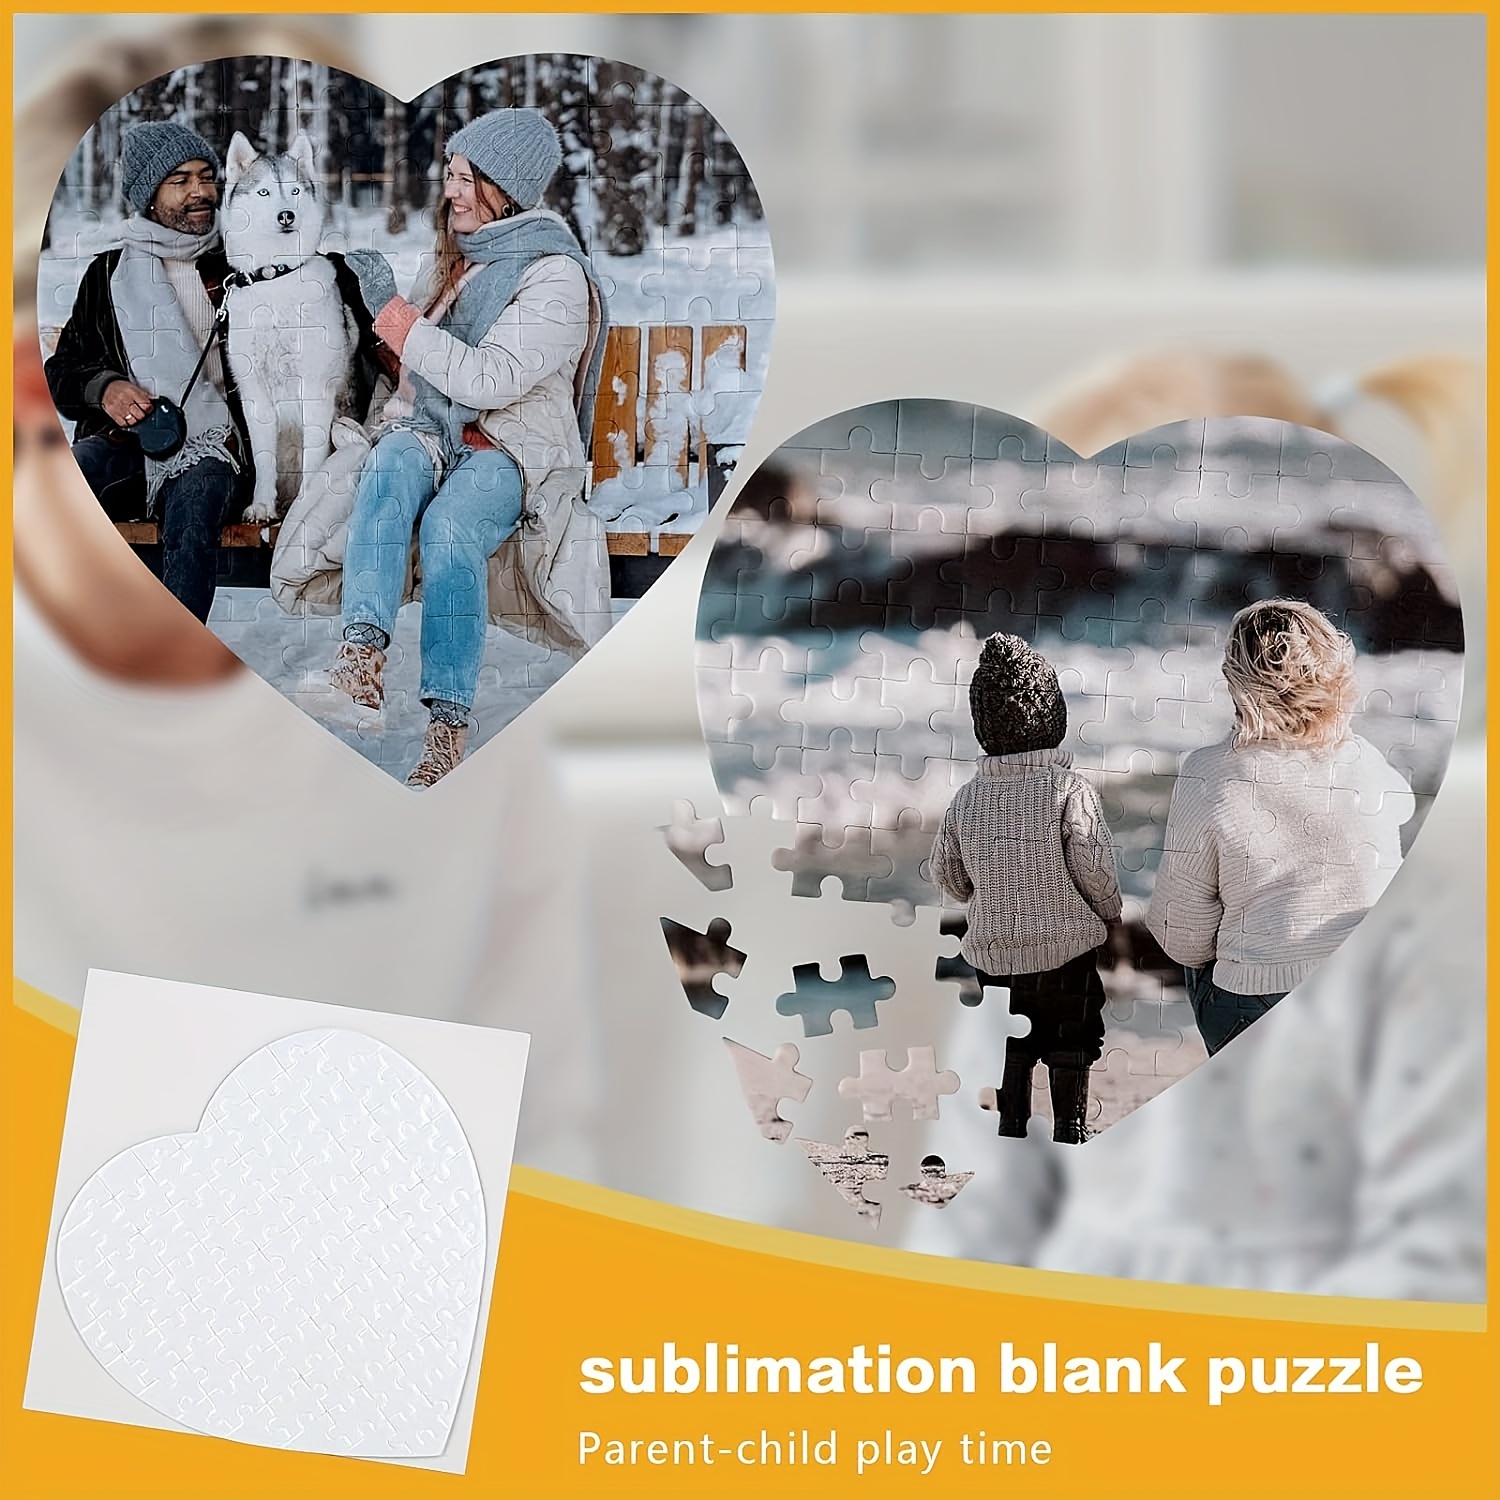  6 Sets Sublimation Blanks Puzzles White Jigsaw Puzzle Blank  Puzzles DIY Blank Puzzle for Sublimation Transfer Thermal Transfer Heat  Press Printing Crafts (A5-20 Style) : Arts, Crafts & Sewing